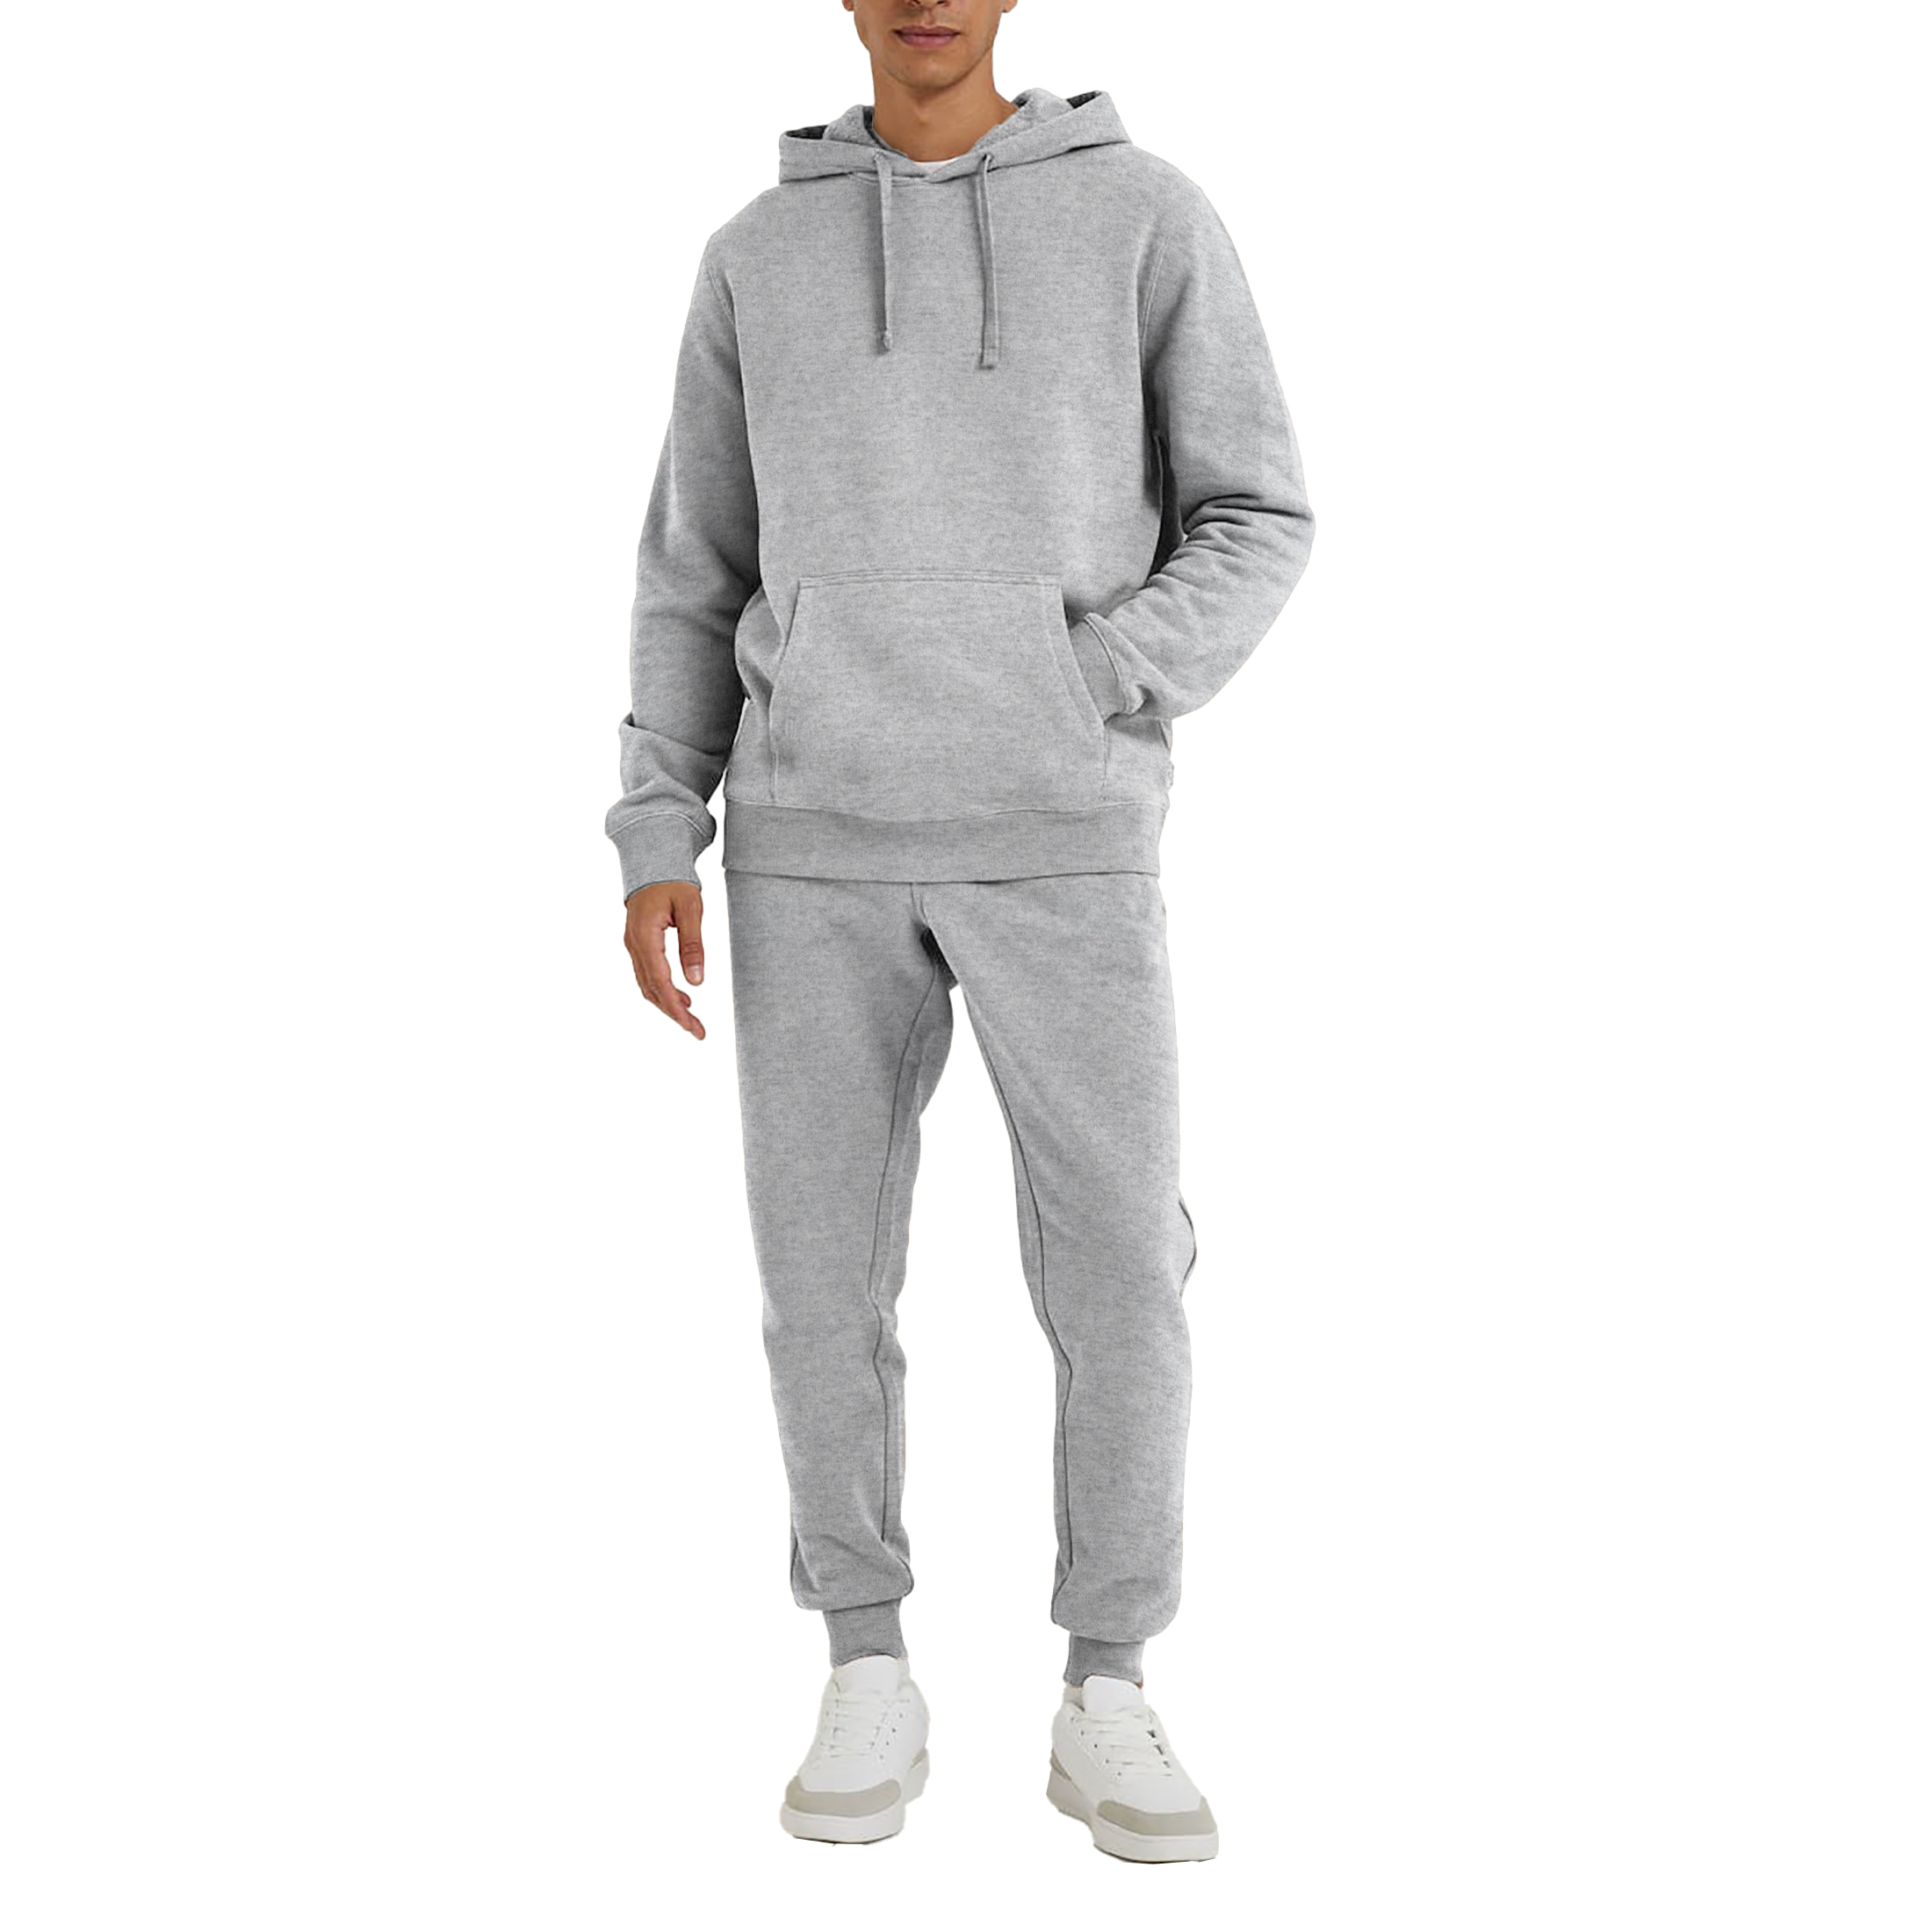 Men's Athletic Warm Jogging Pullover Active Tracksuit - Grey, 3X-Large